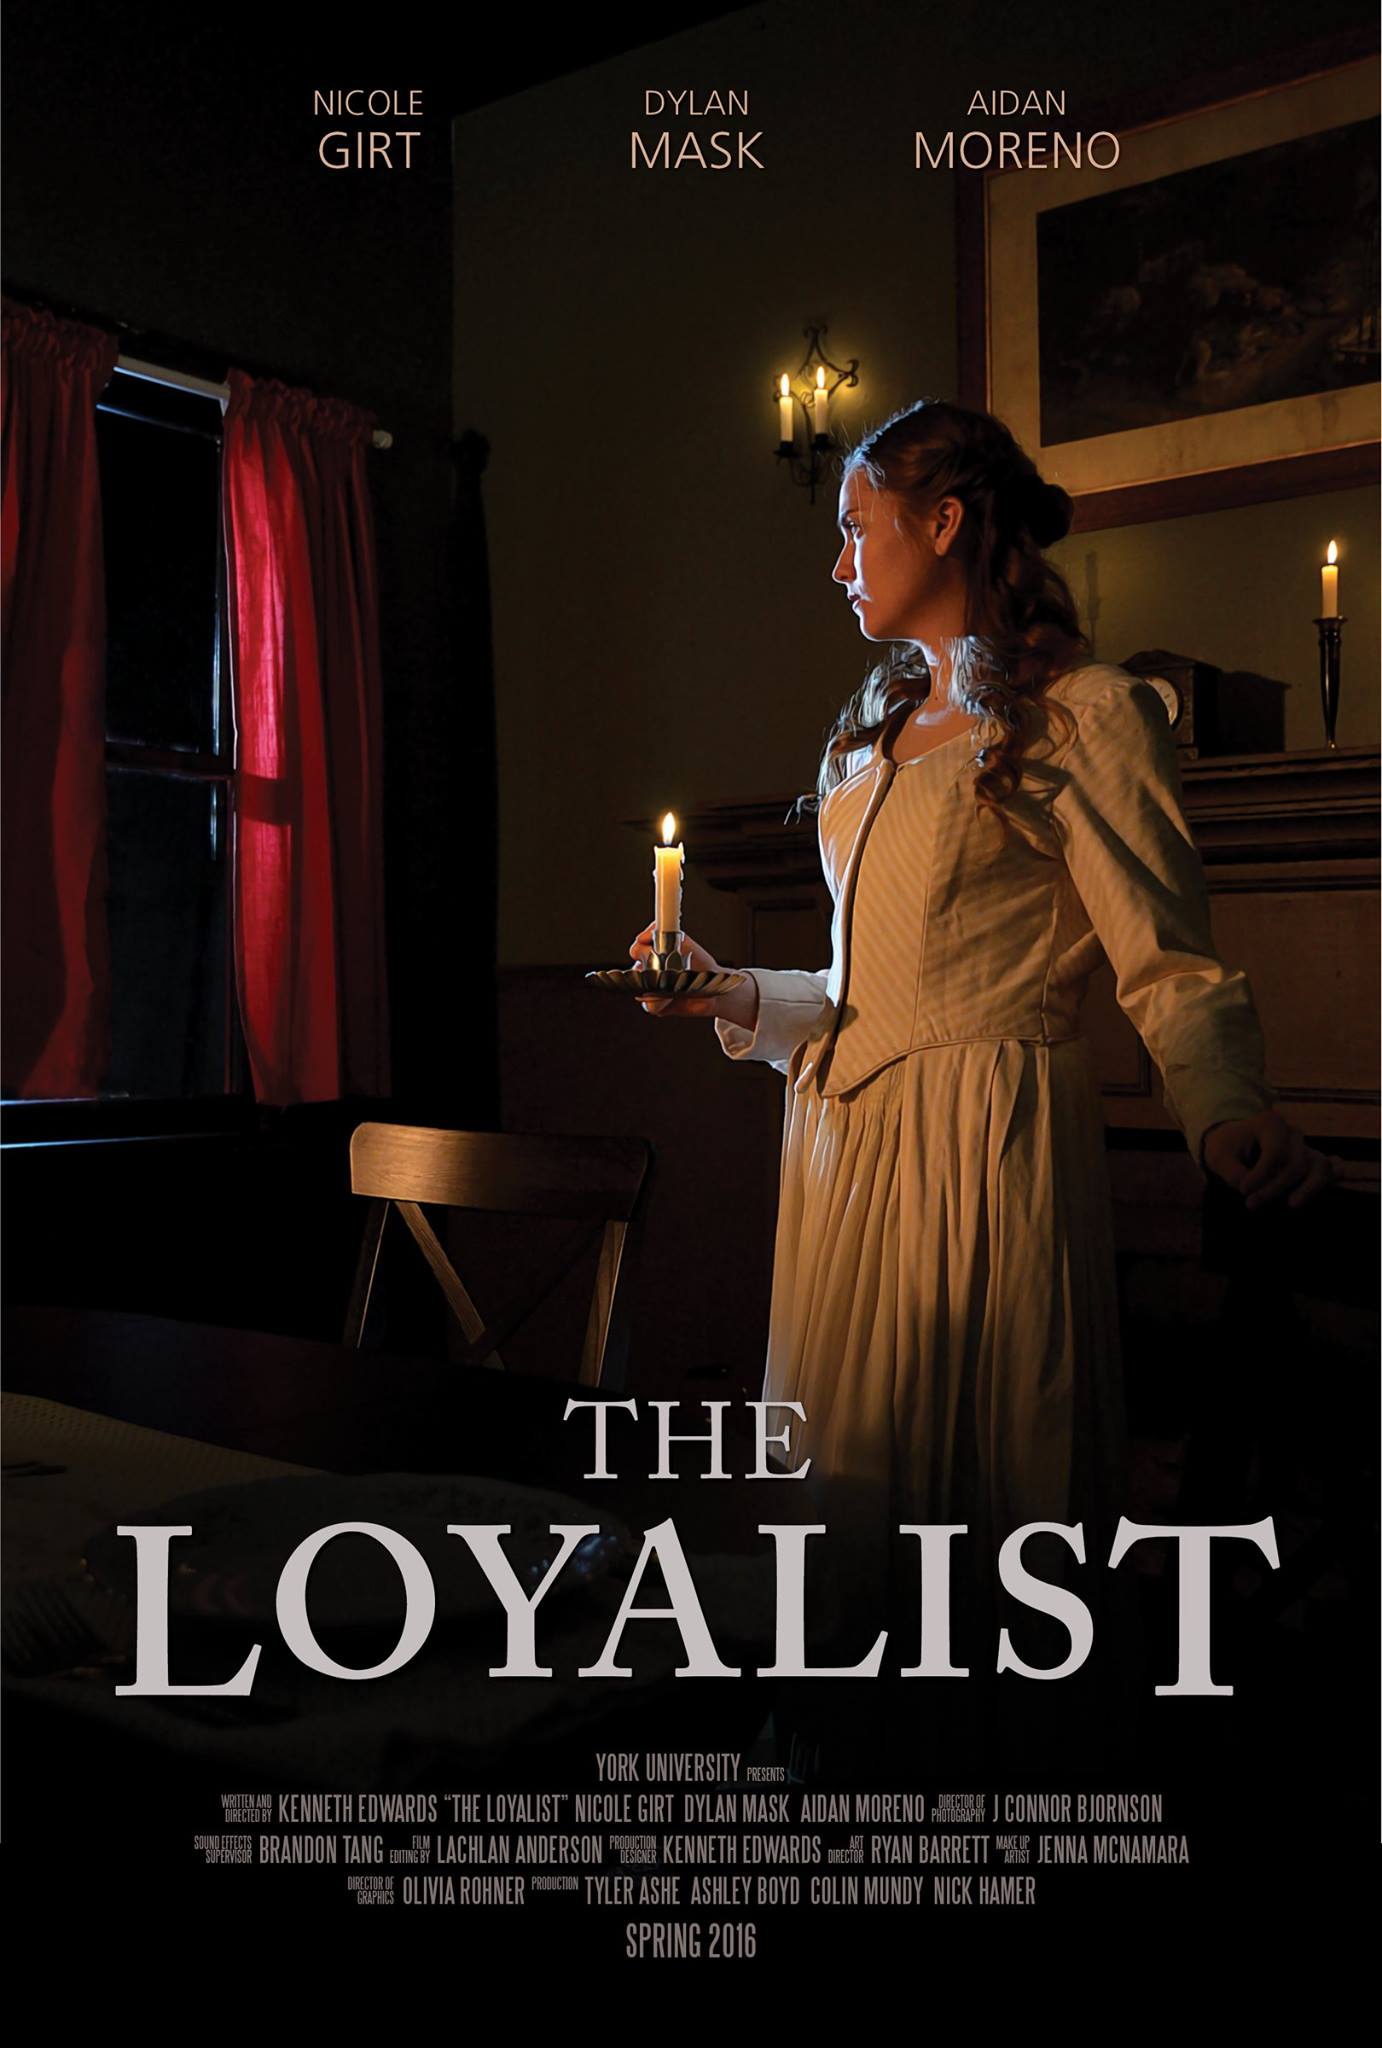 Nicole Girt in promotional poster for 'The Loyalist'.